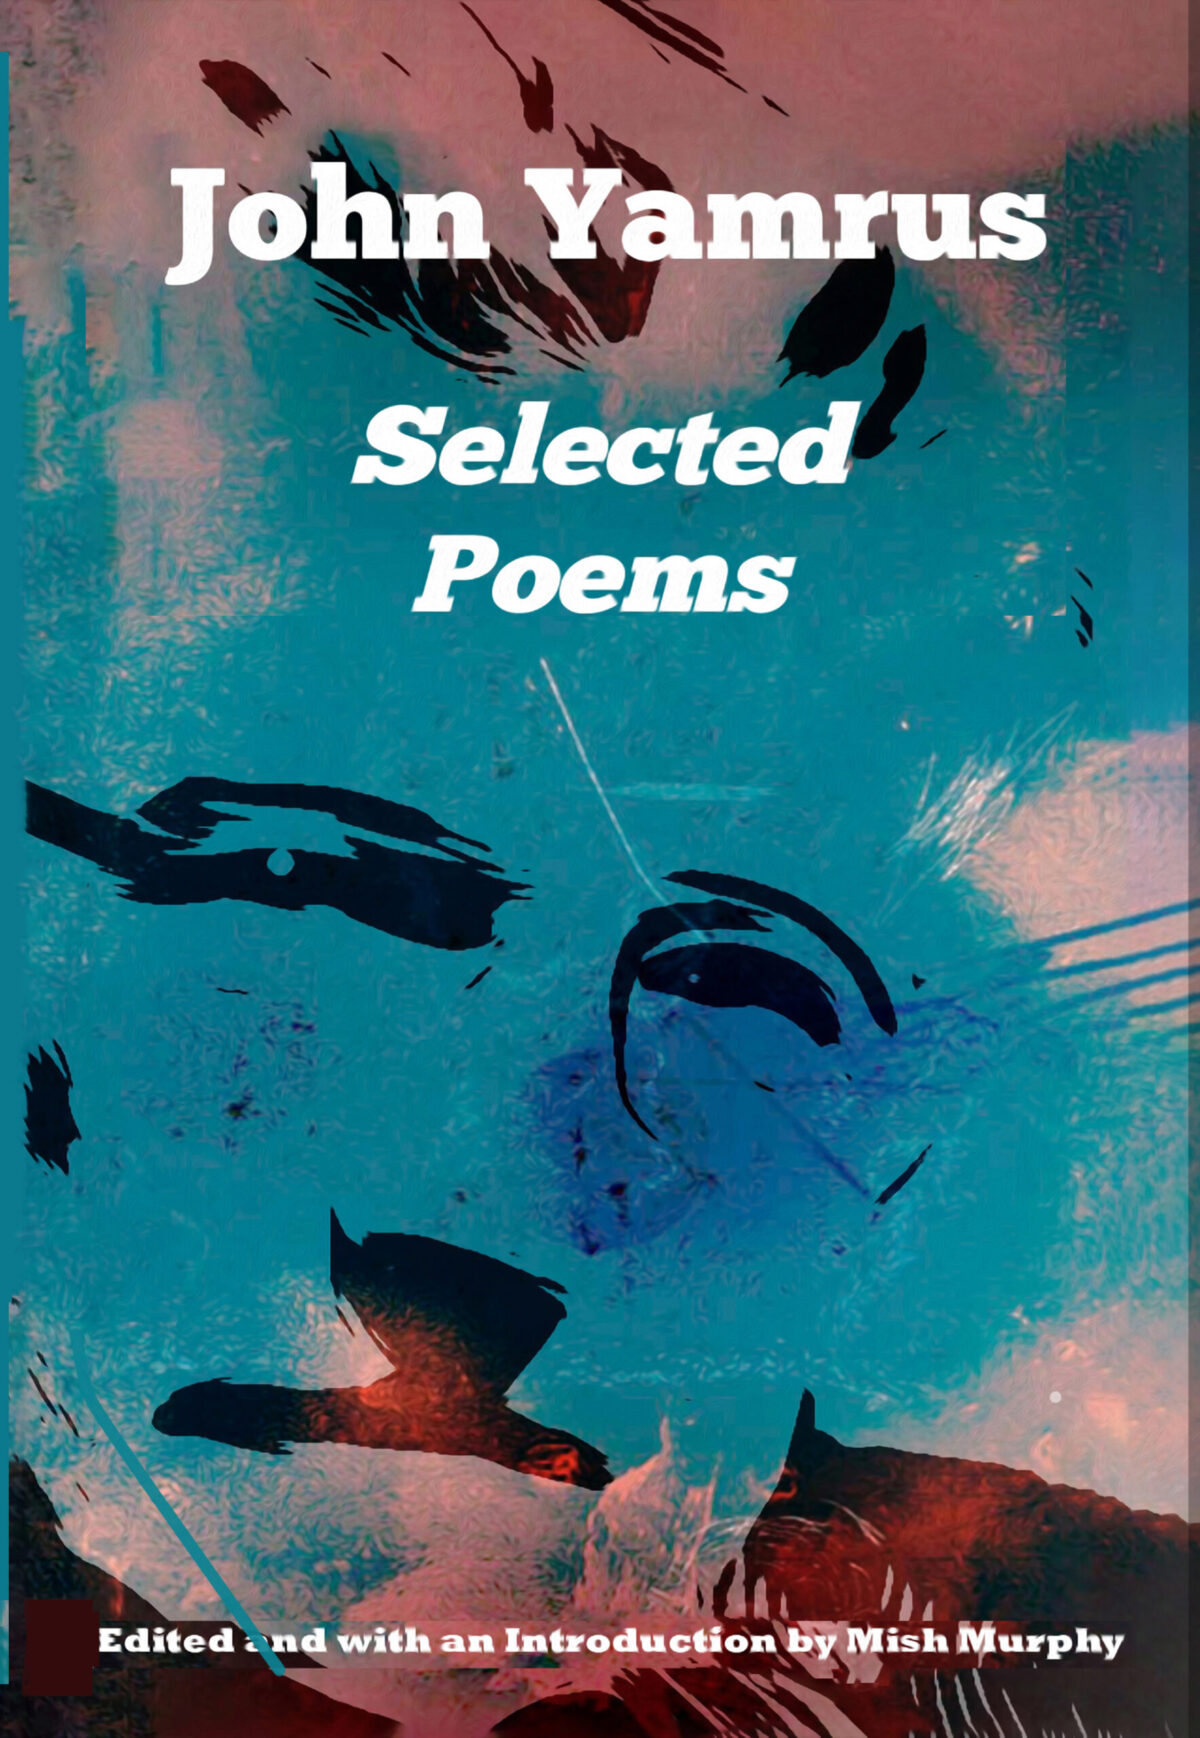 Front-Cover-of-SELECTED-POEMS-by-John-Yamrus shows John Yamrus's face superimposed against a cyan background